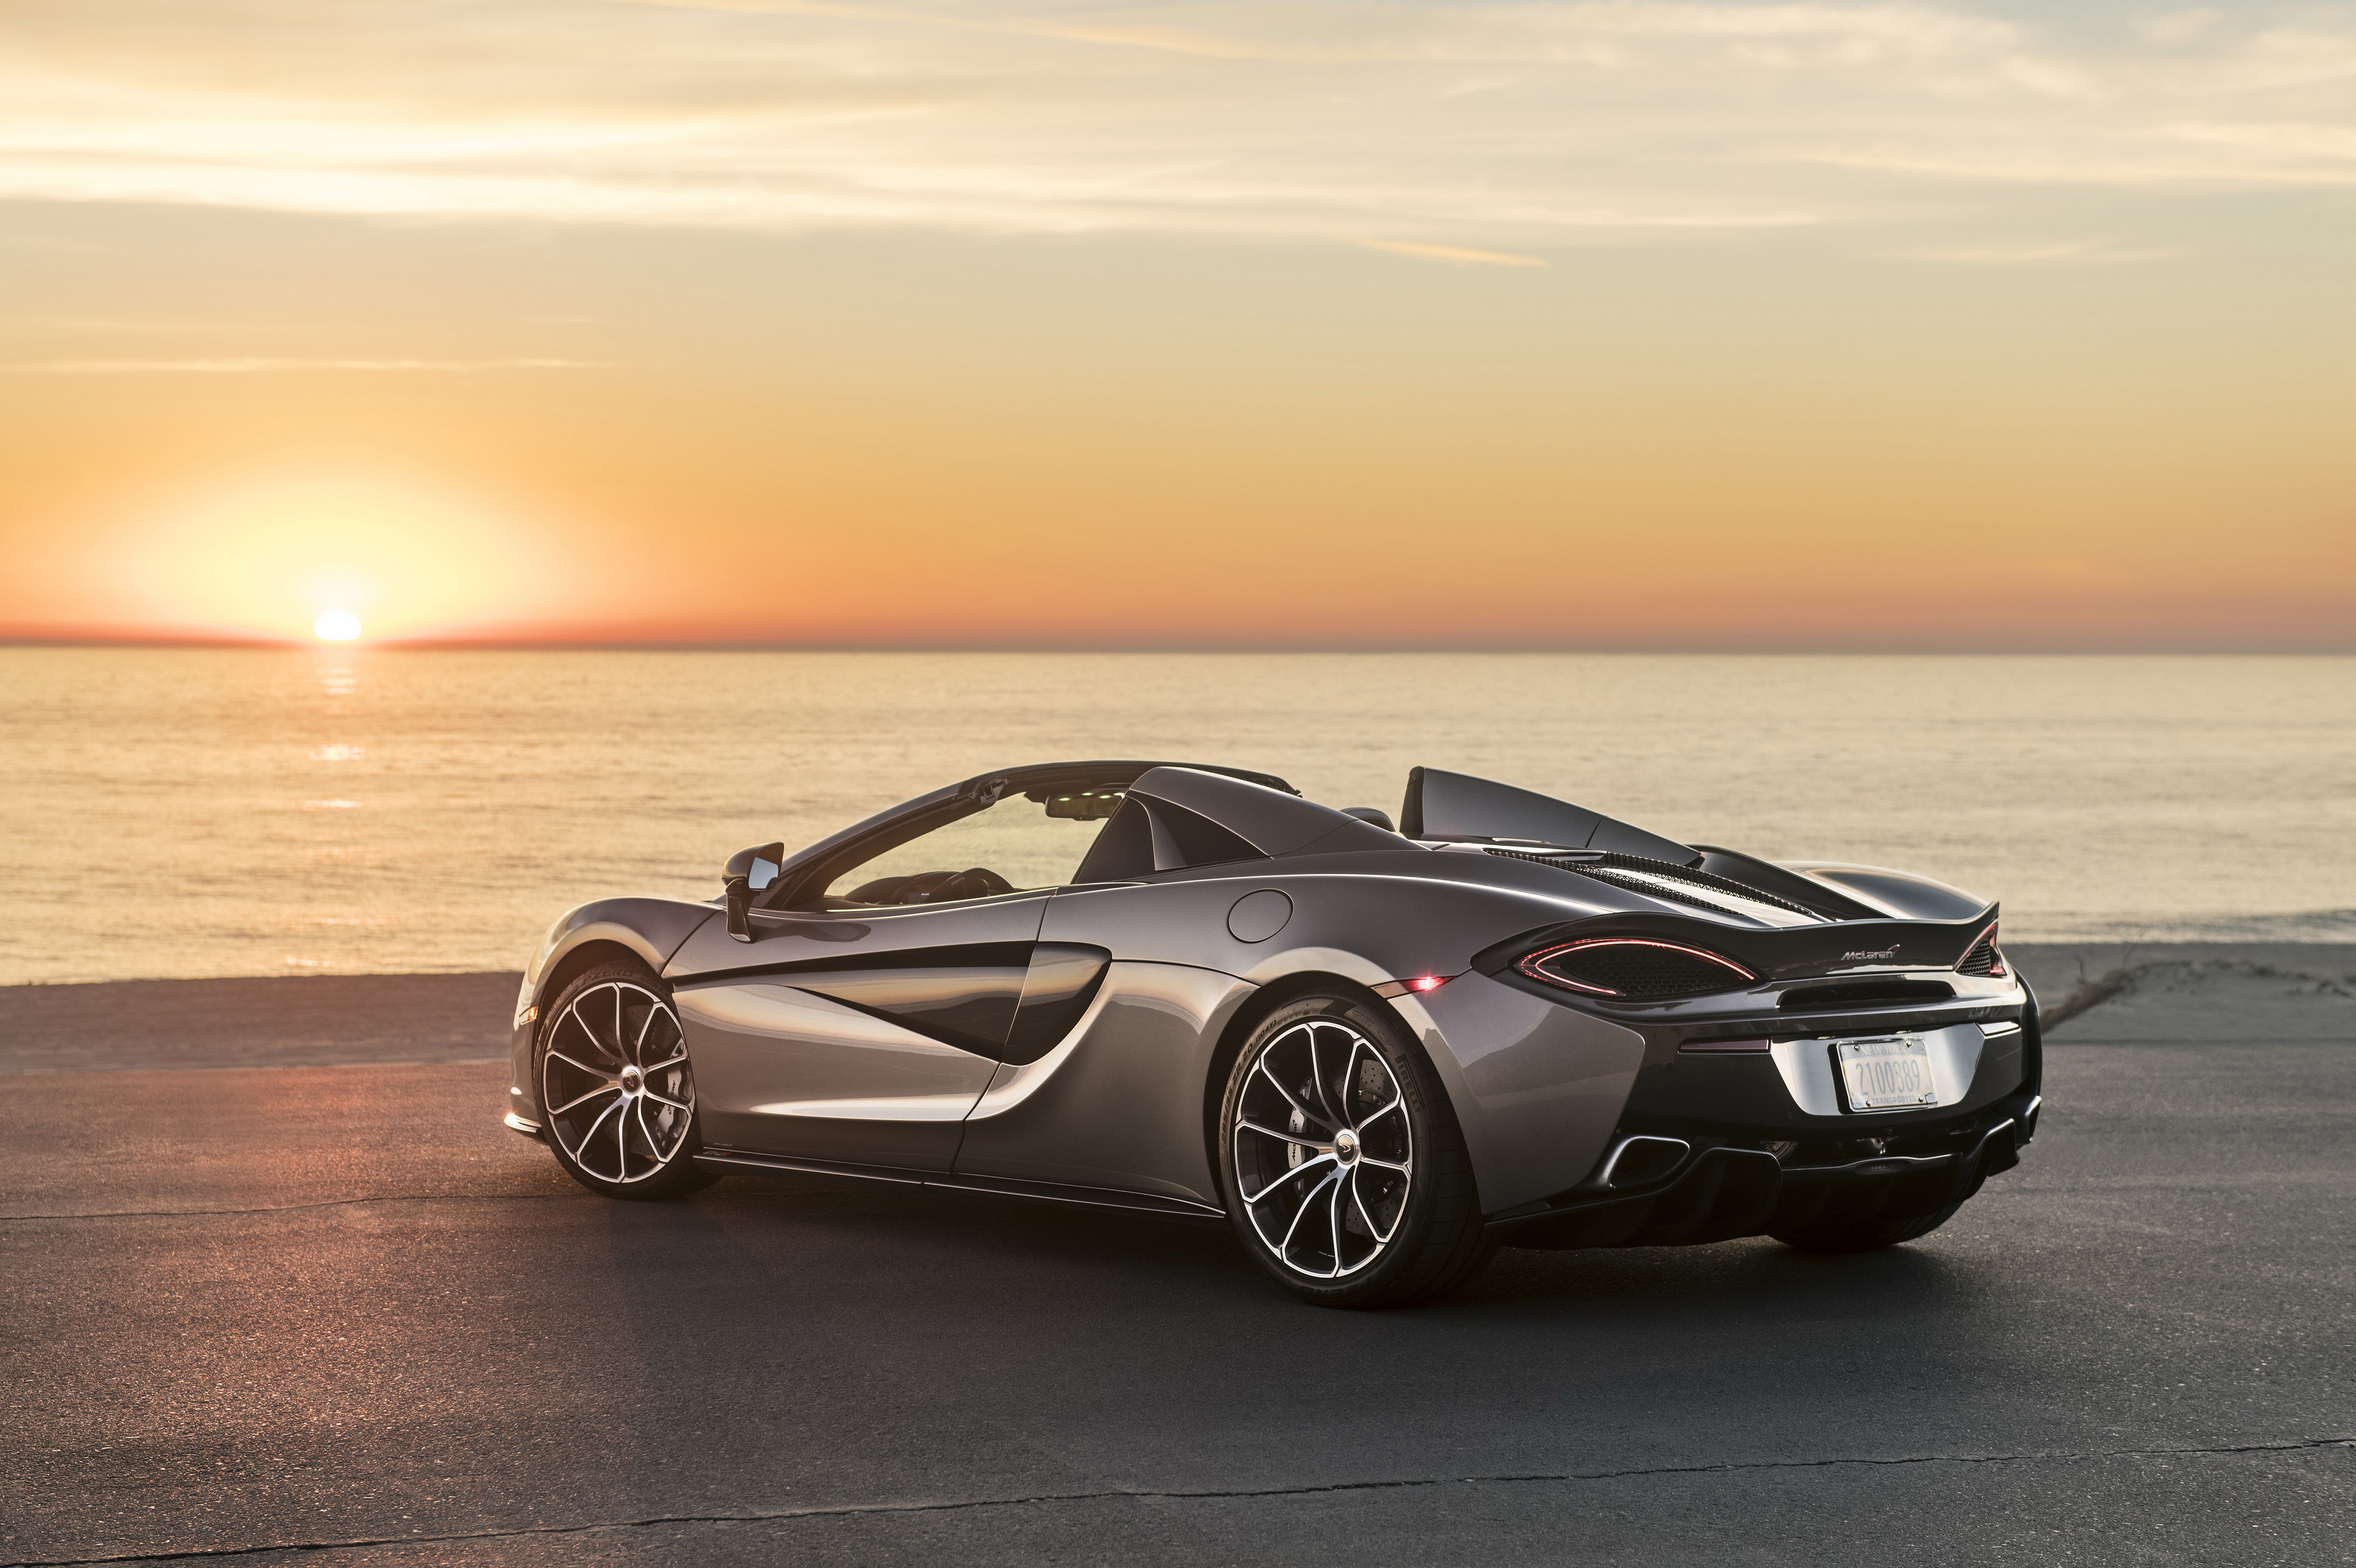 Mclaren 570s Spider 2018 Rear Hd Cars 4k Wallpapers Images Backgrounds Photos And Pictures